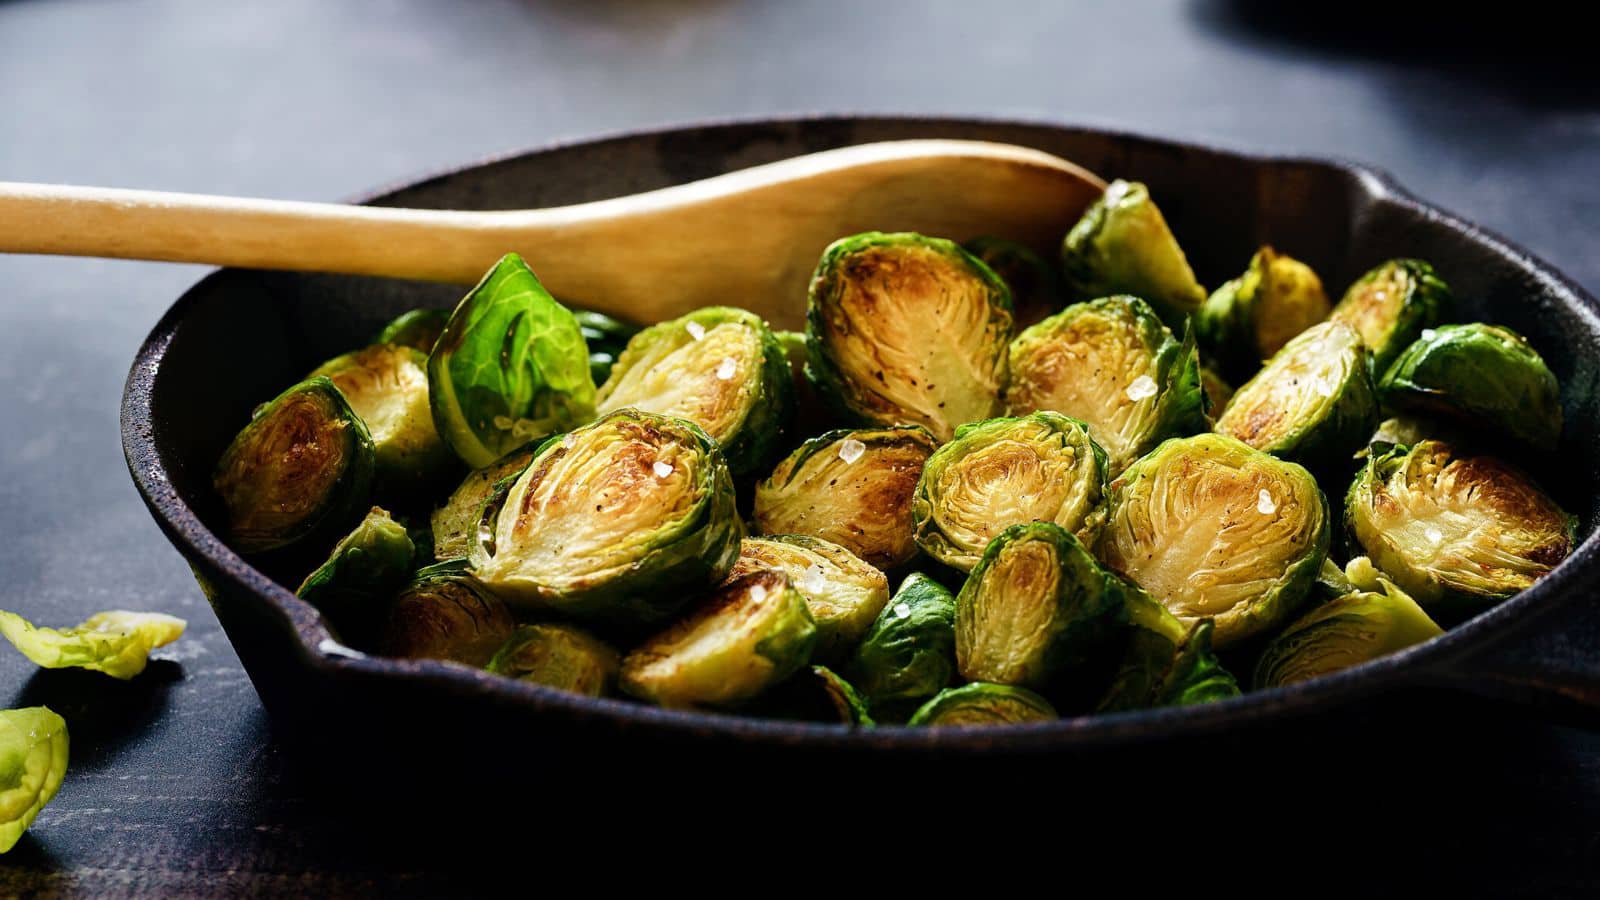 Boost your health with these 7 garlic vegan sides